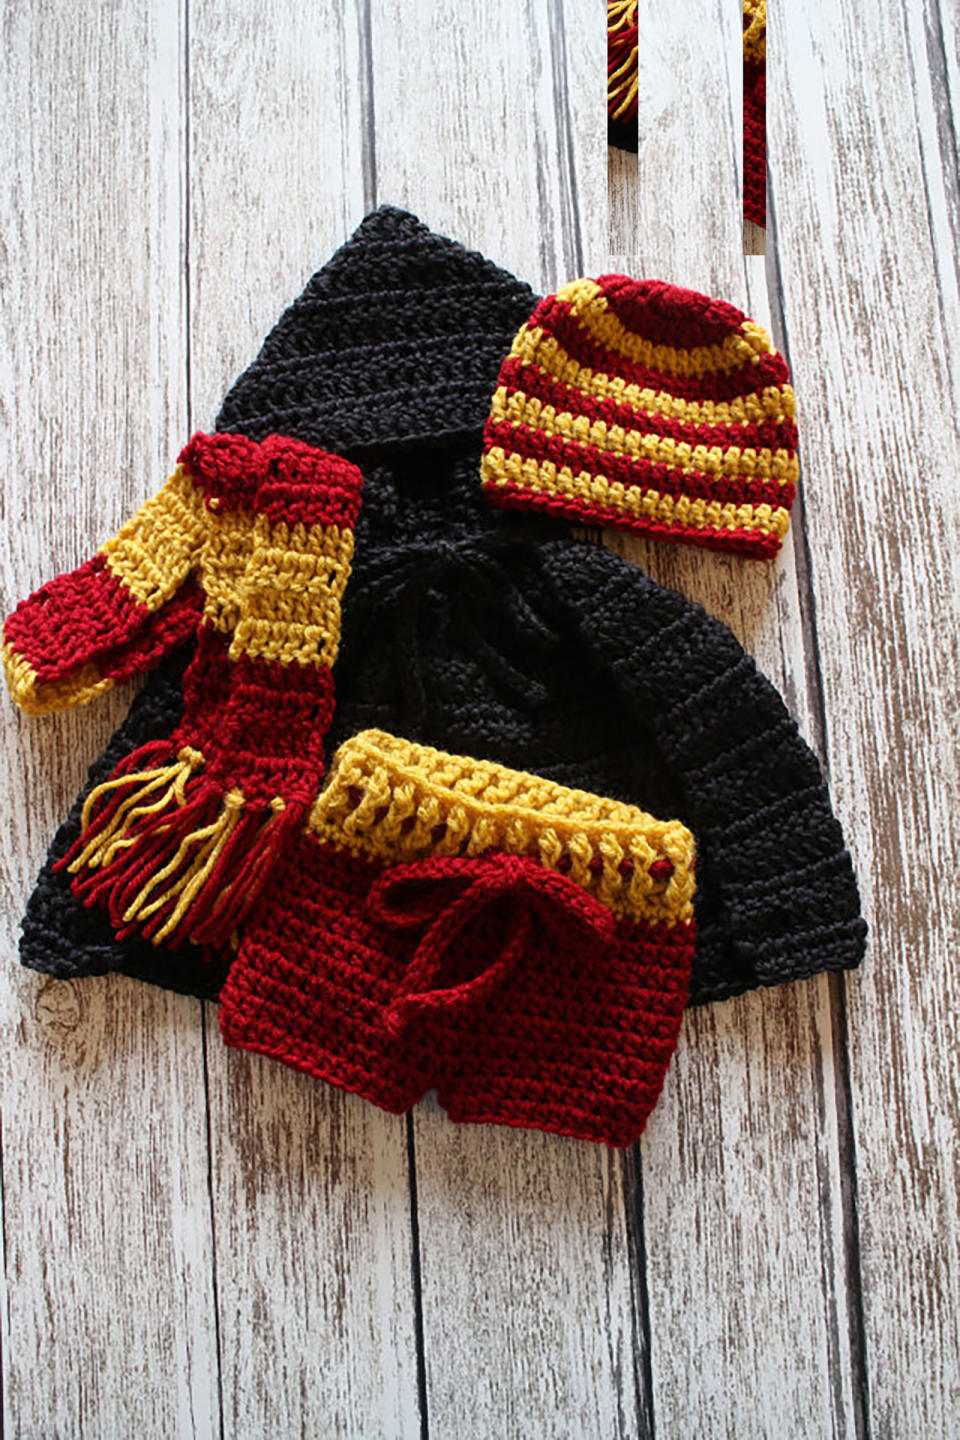 Crocheted Baby Harry Potter Costume